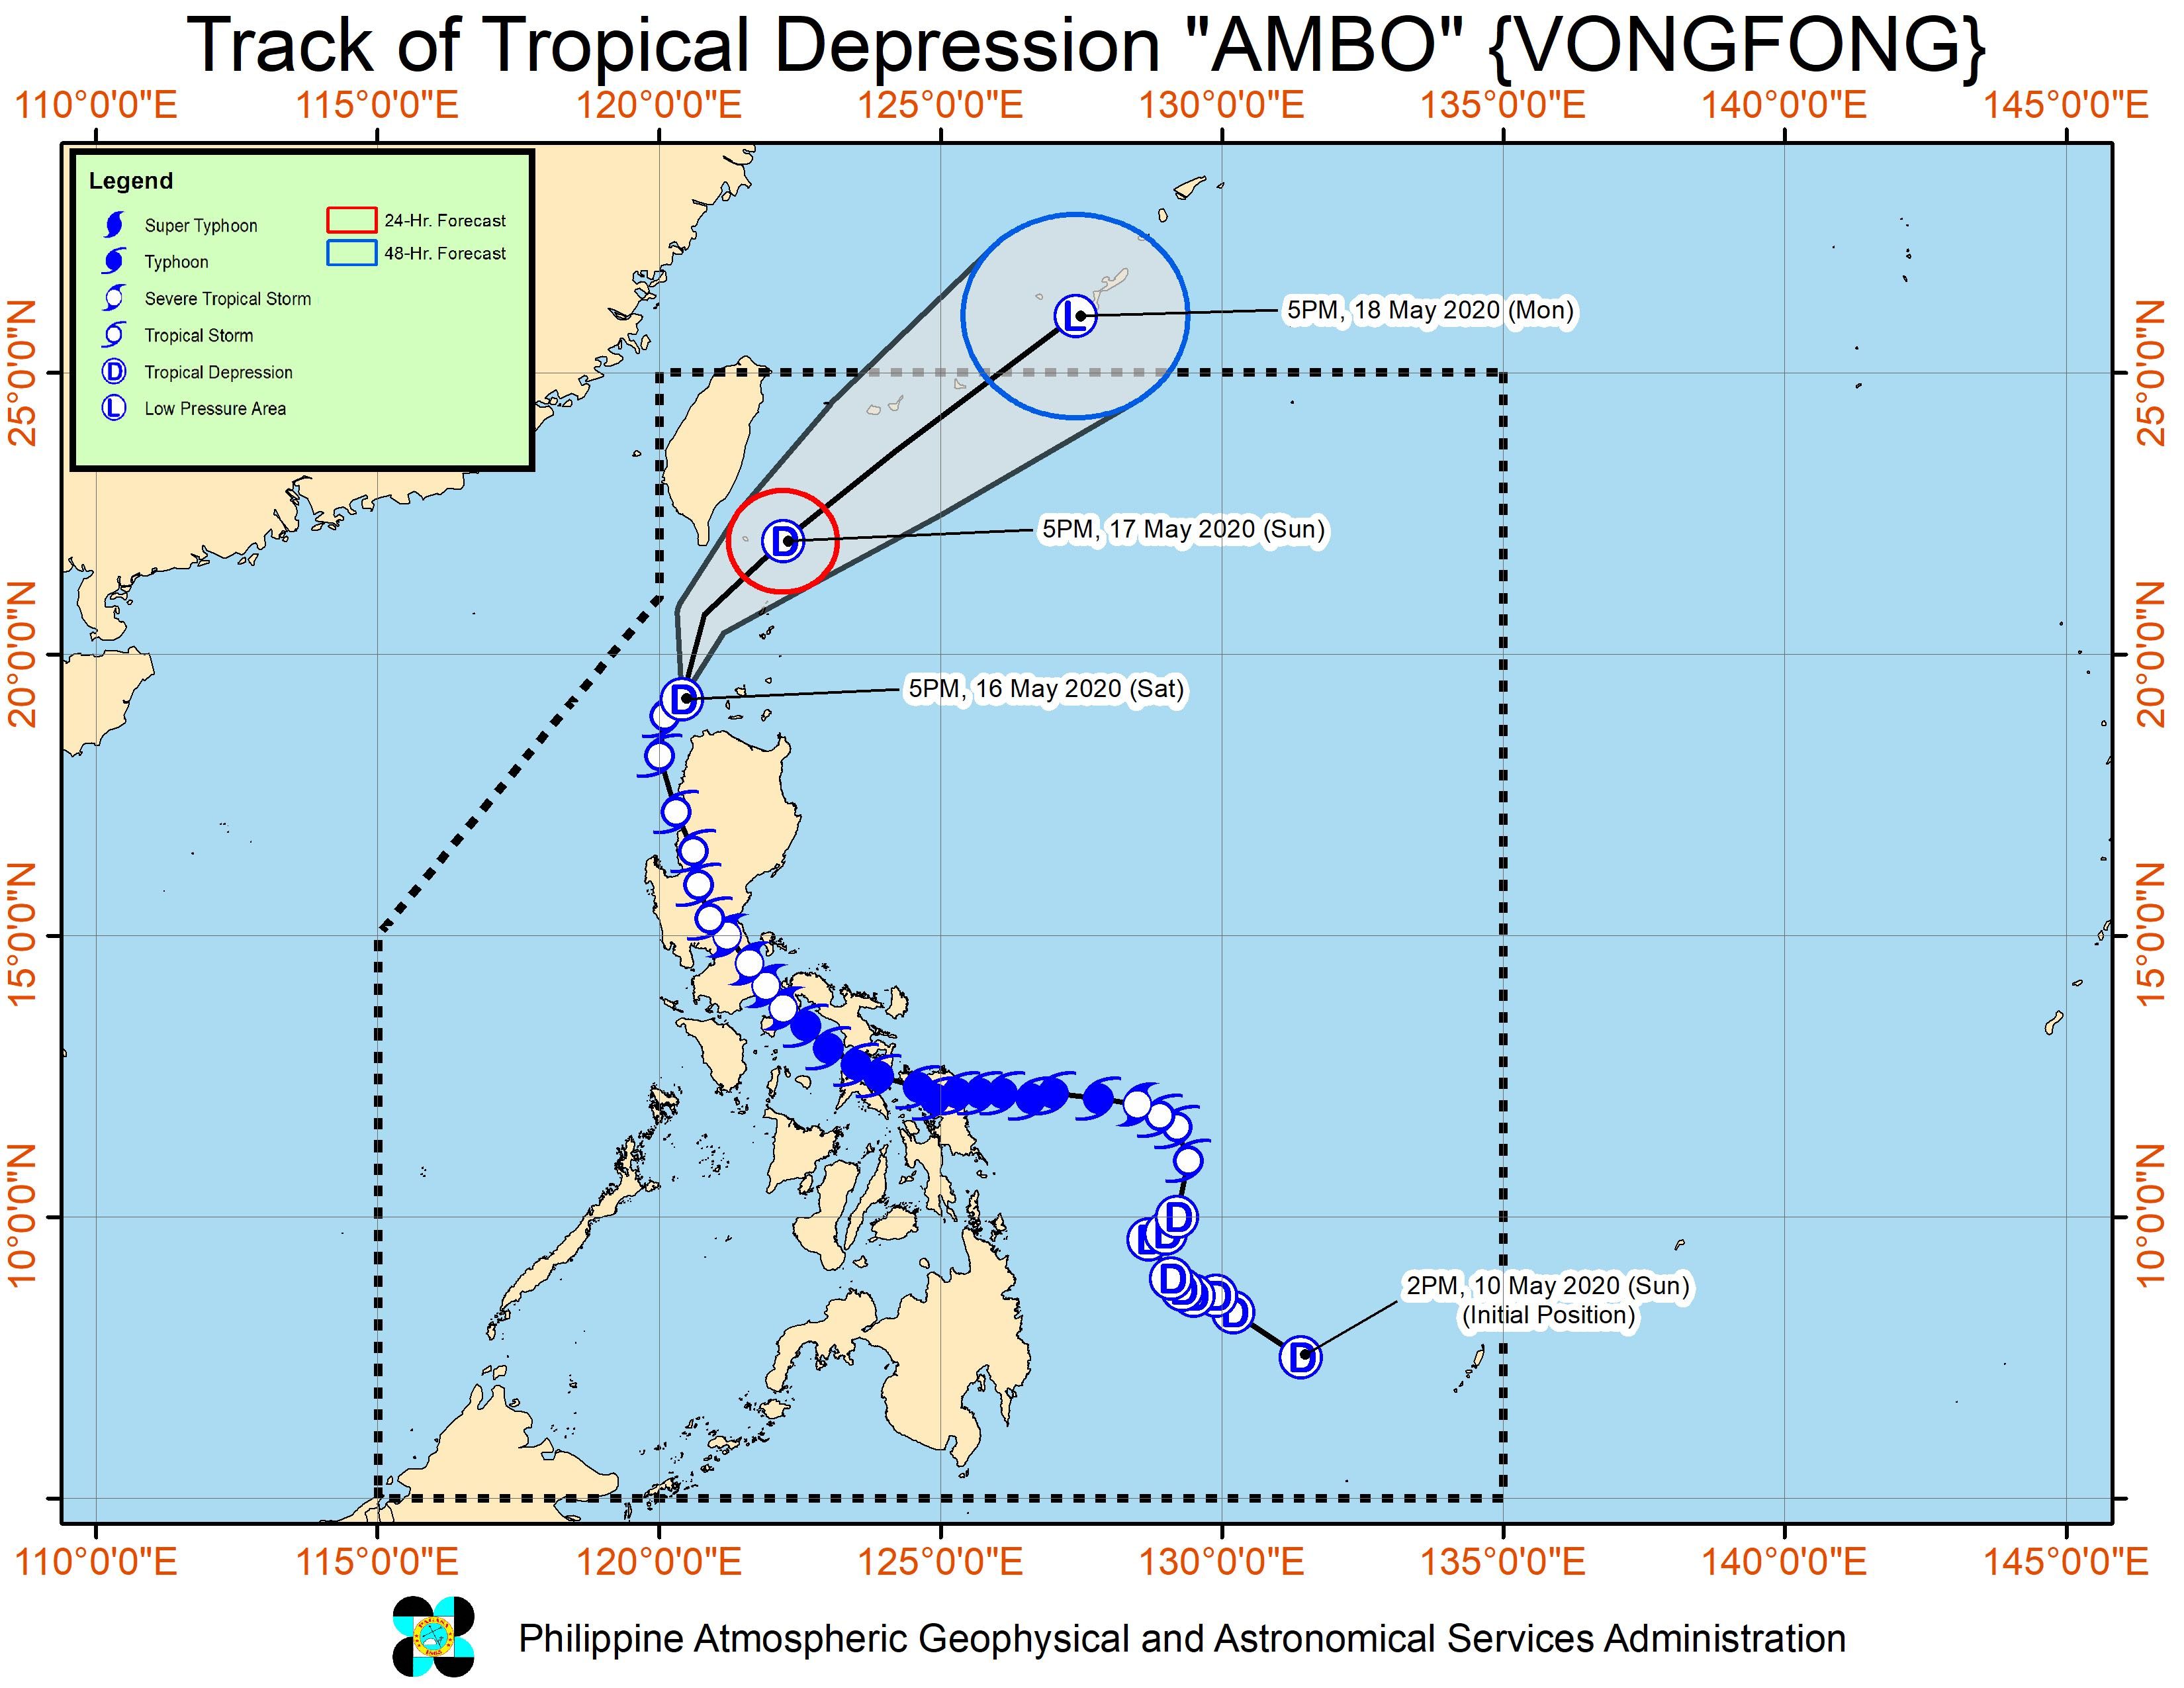 Forecast track of Tropical Depression Ambo (Vongfong) as of May 16, 2020, 8 pm. Image from PAGASA 